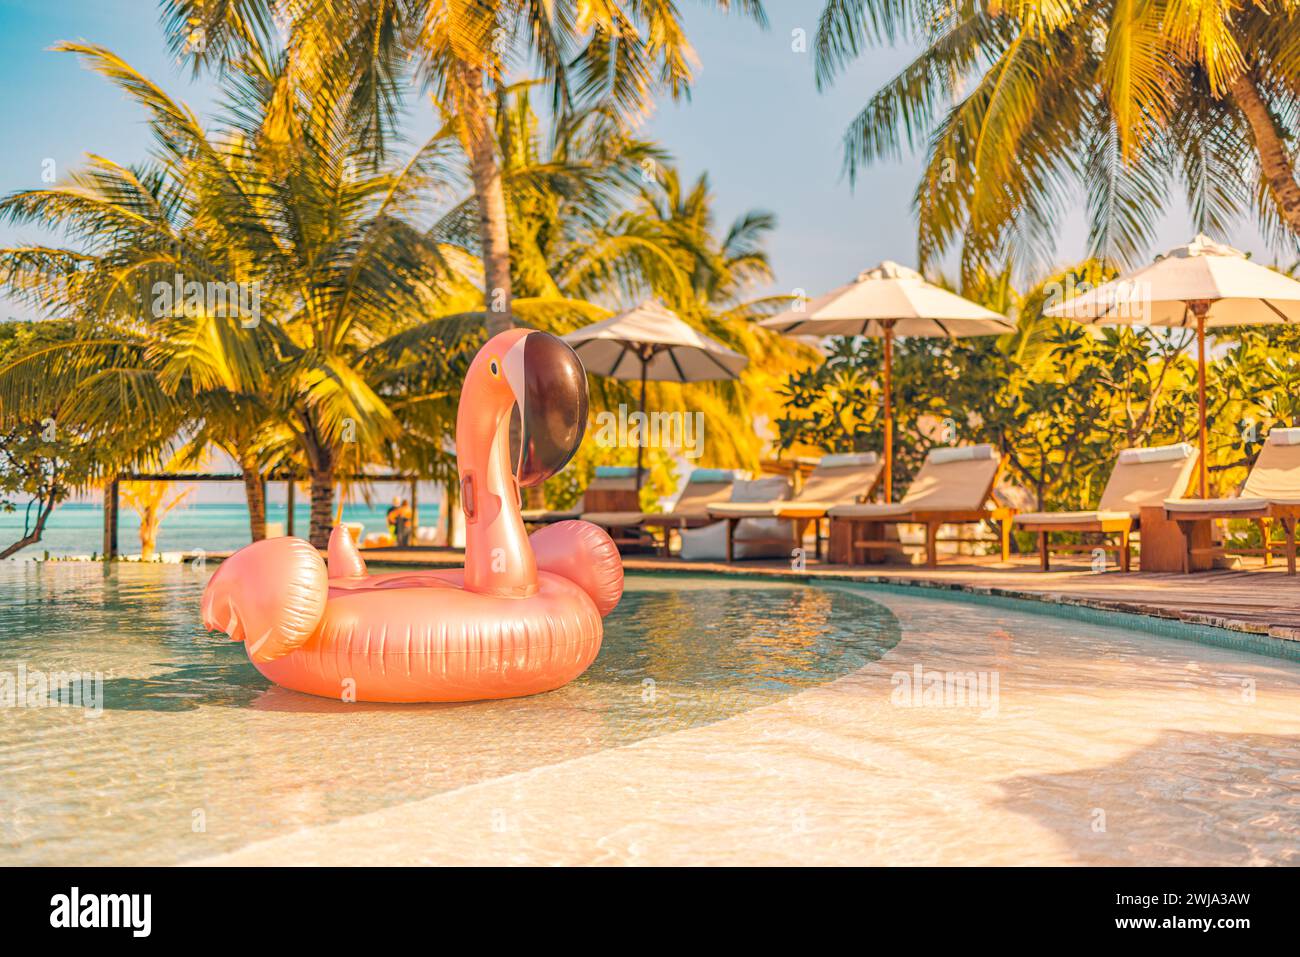 Summer tourism swimming pool inflatable pink flamingo, luxury resort hotel poolside. Happy sunset tropical paradise island infinity pool sea view Stock Photo